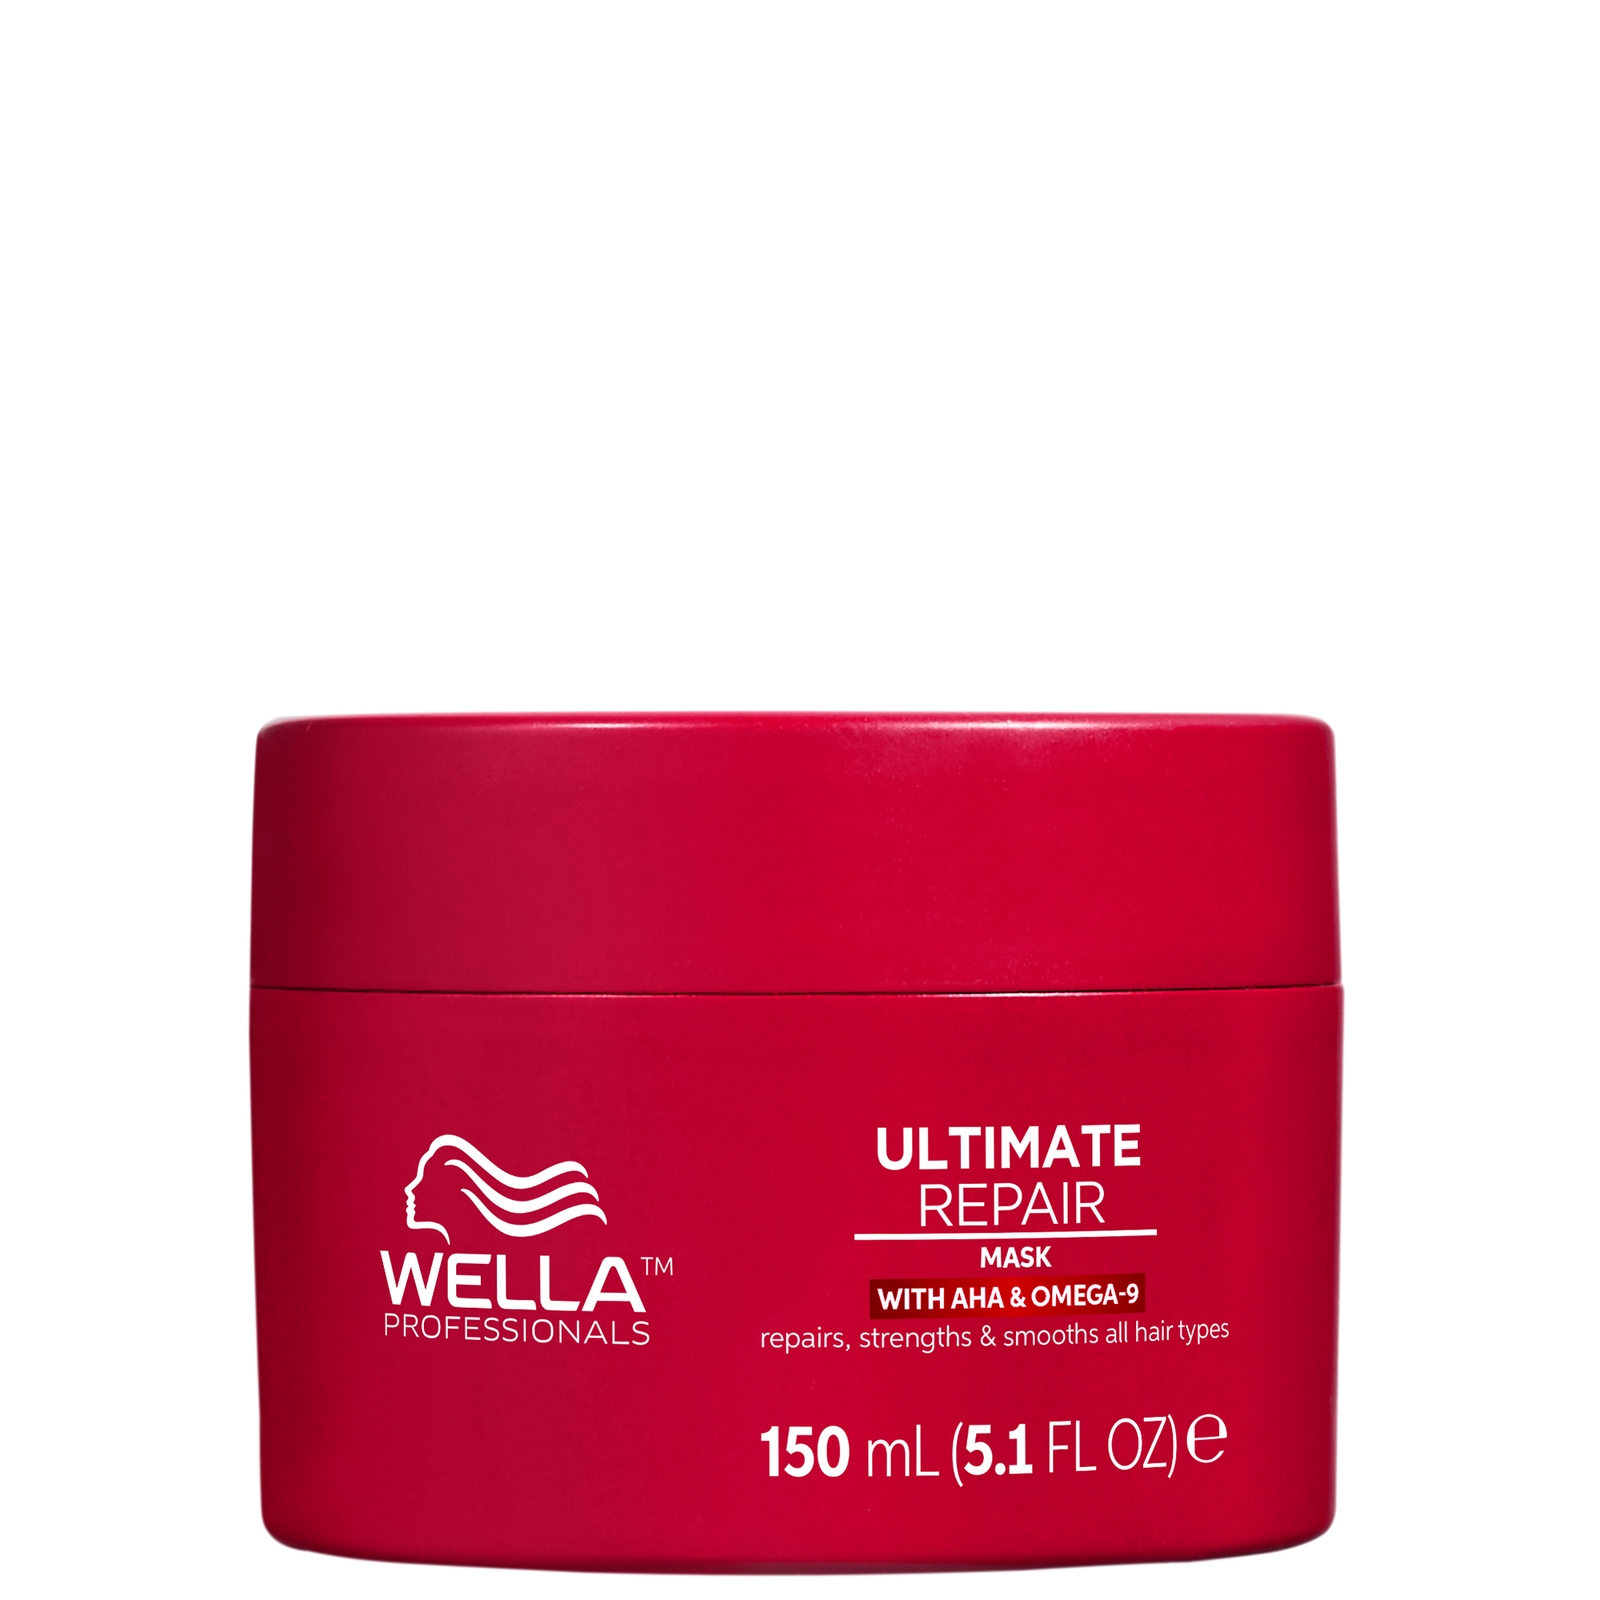 ULTIMATE REPAIR HAIR MASK FOR ALL TYPES OF HAIR DAMAGE 150ML